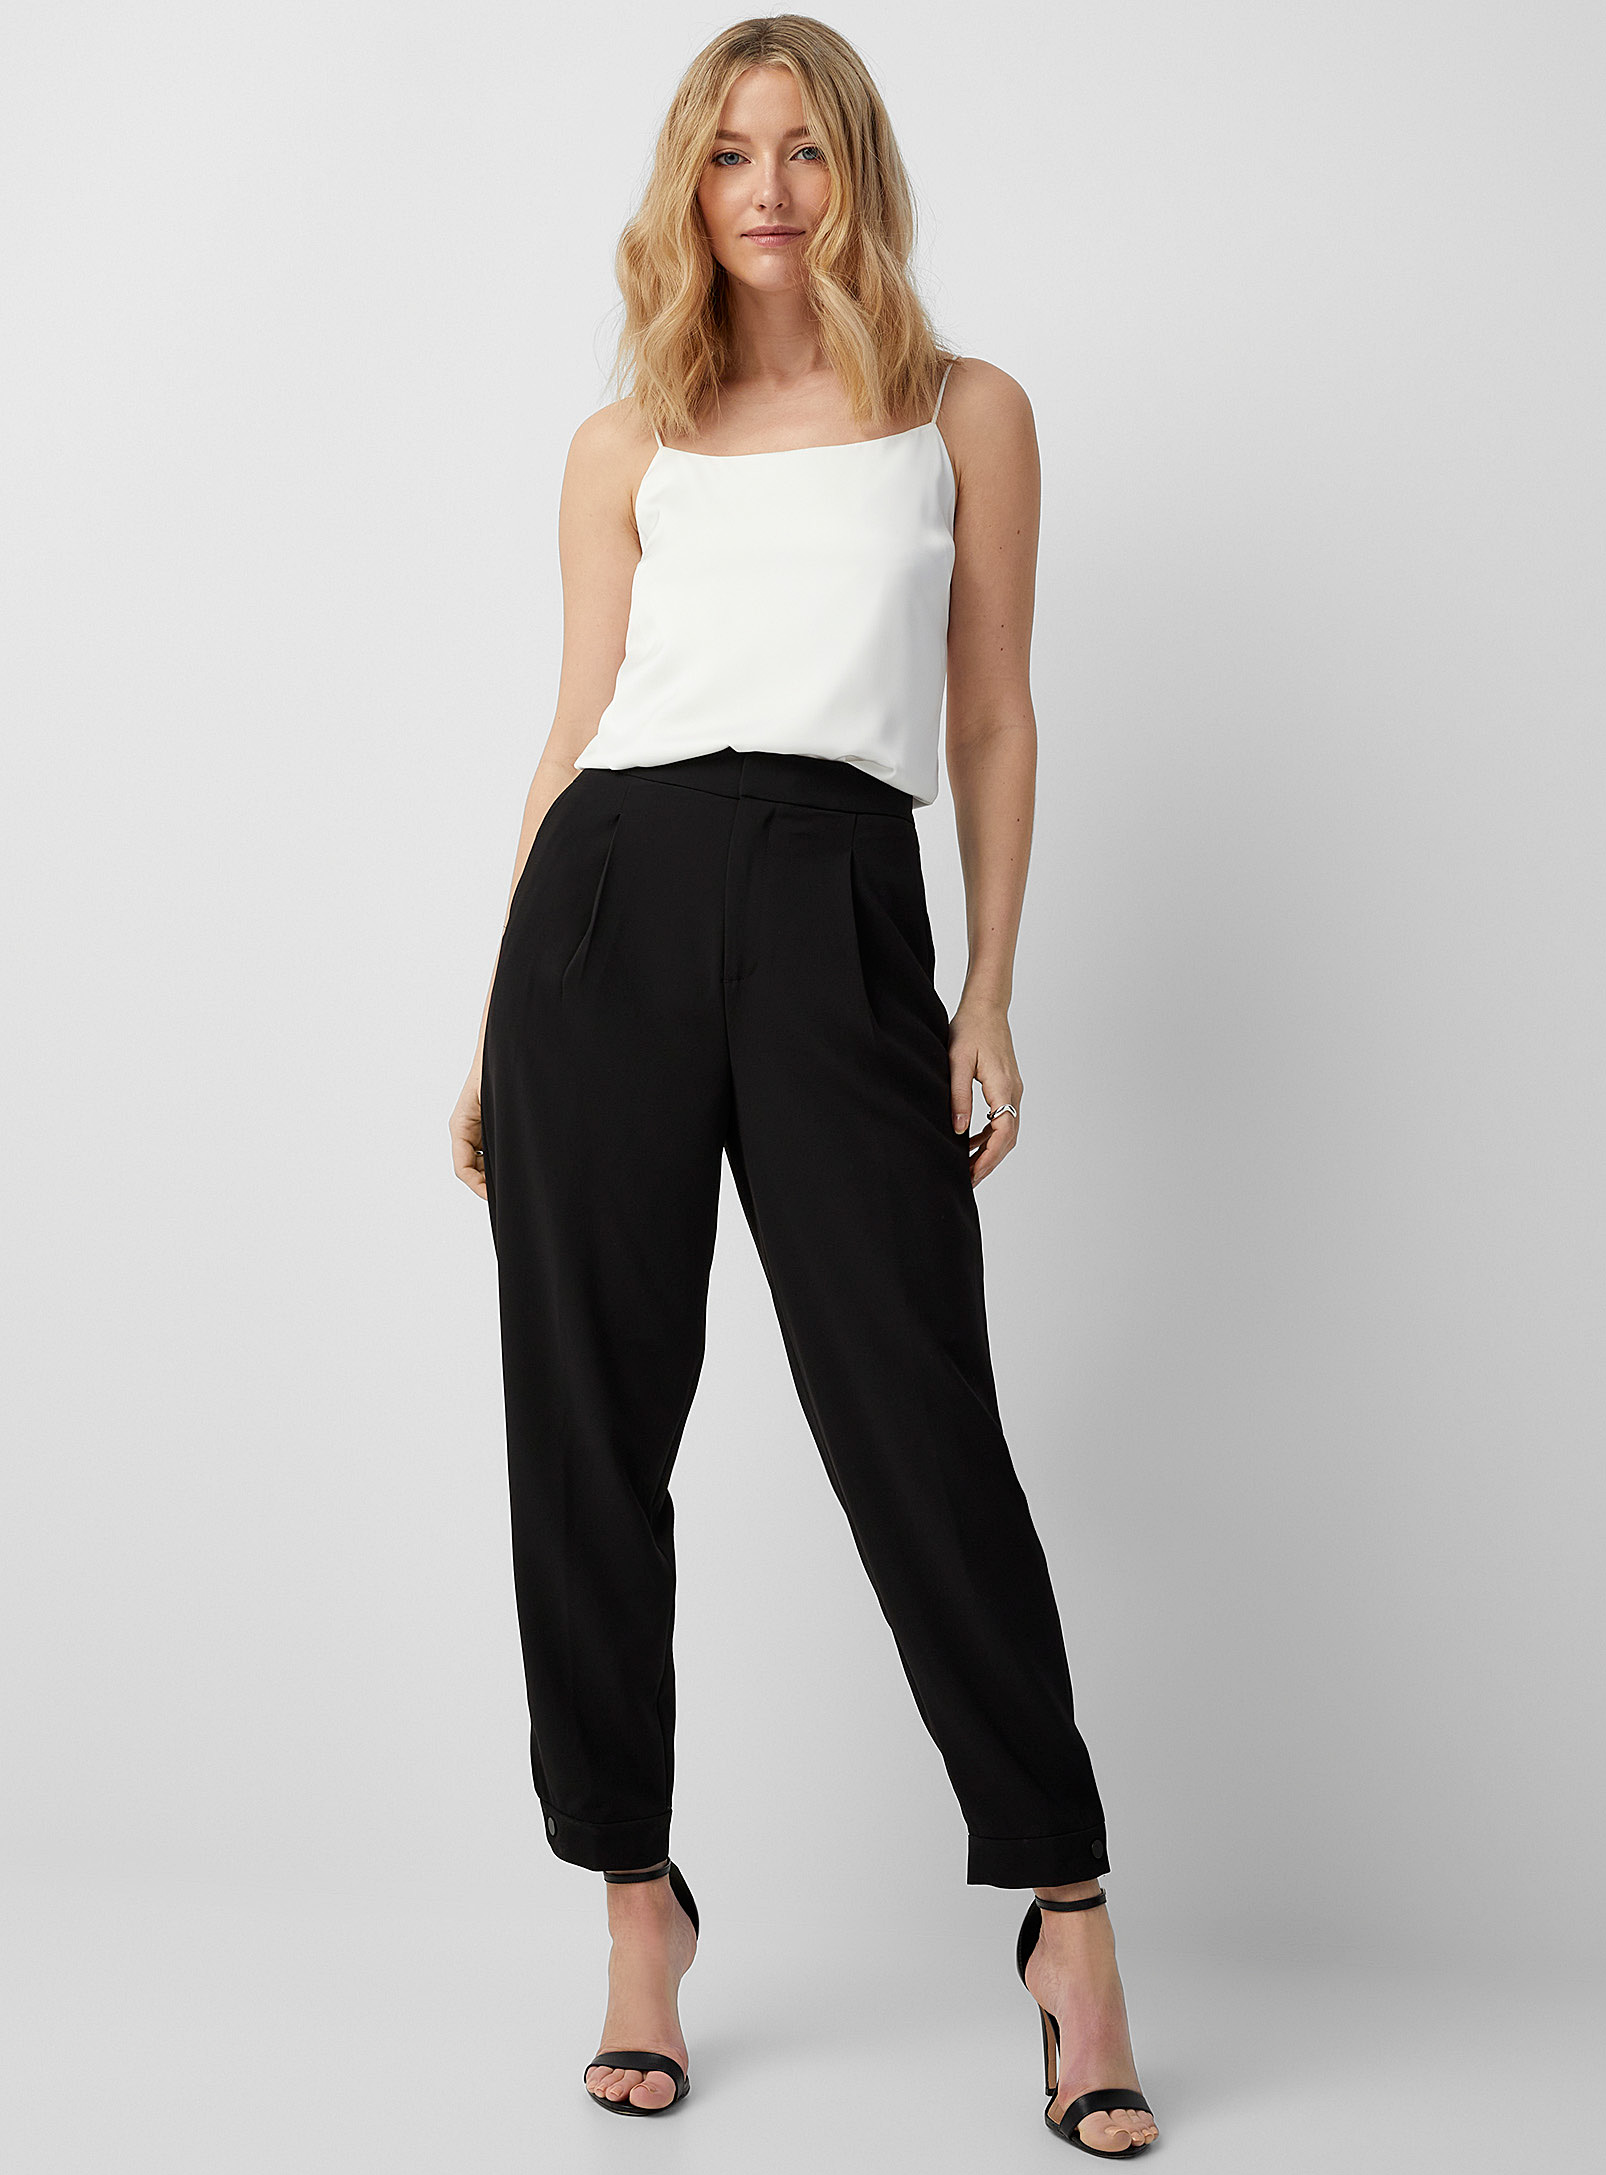 Contemporaine Flowing Balloon Pant In Black